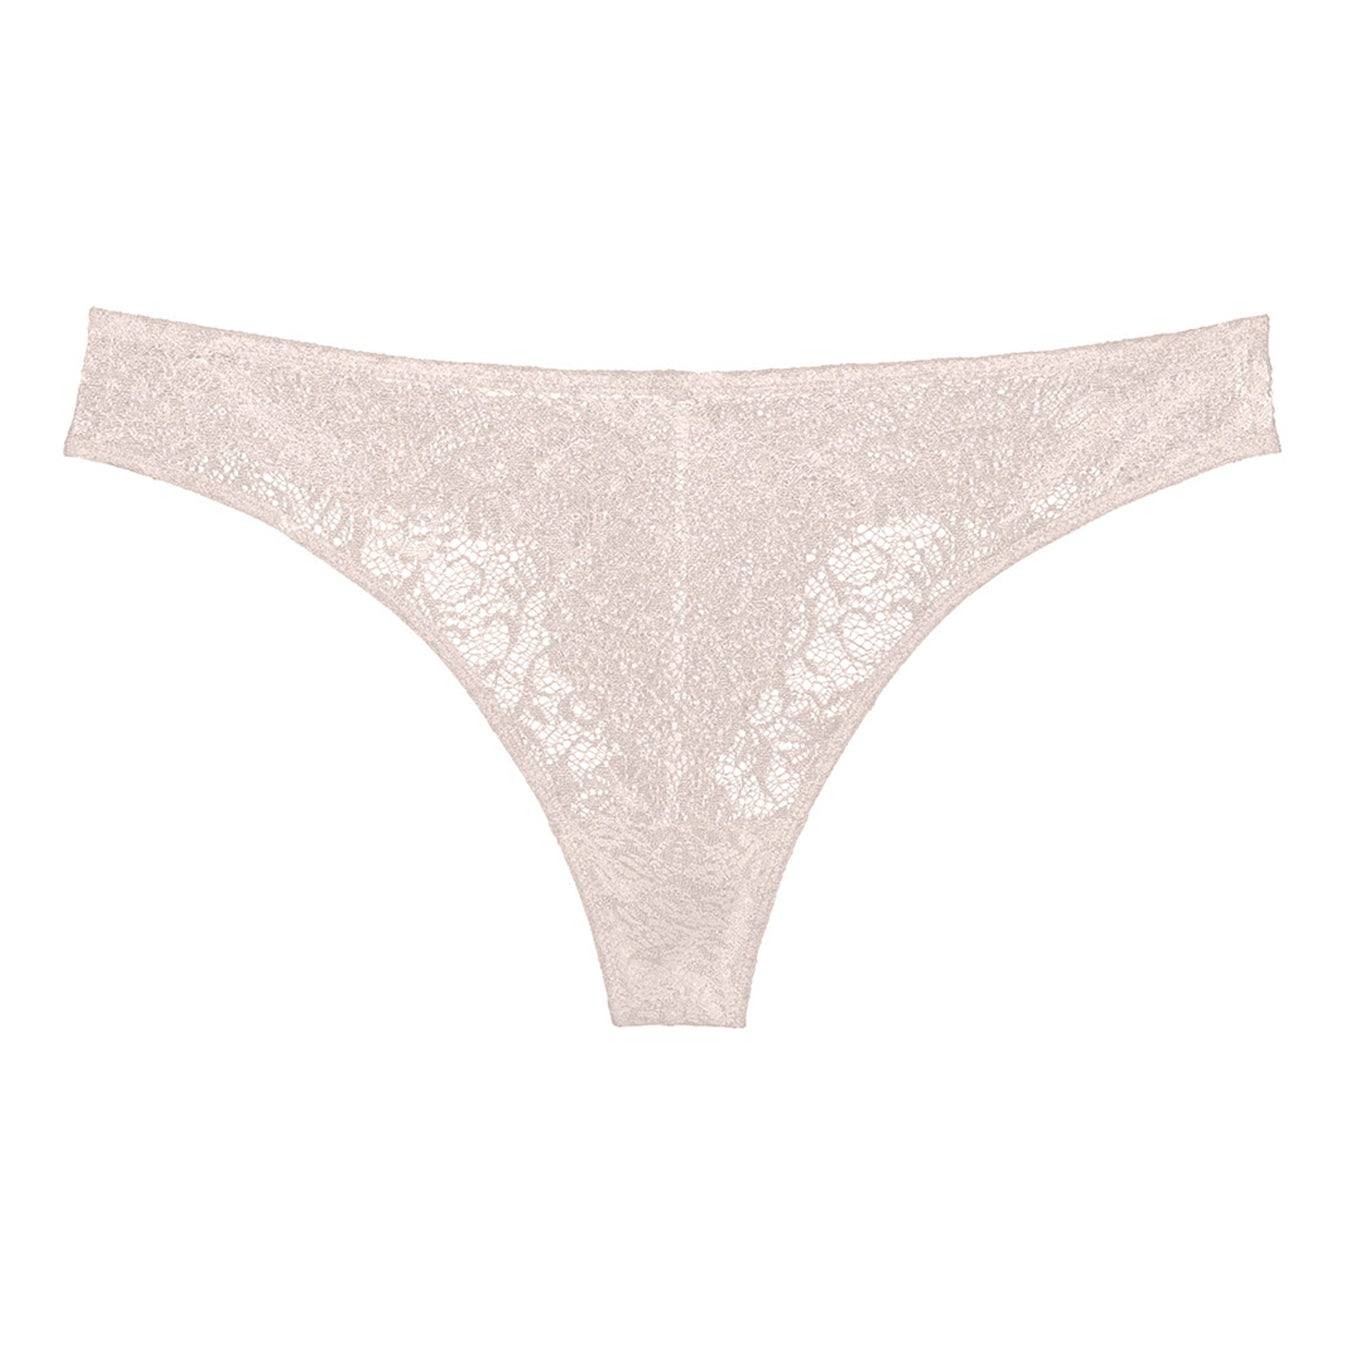  KELITCH Women's Briefs Scalloped Lace Hipster Thong